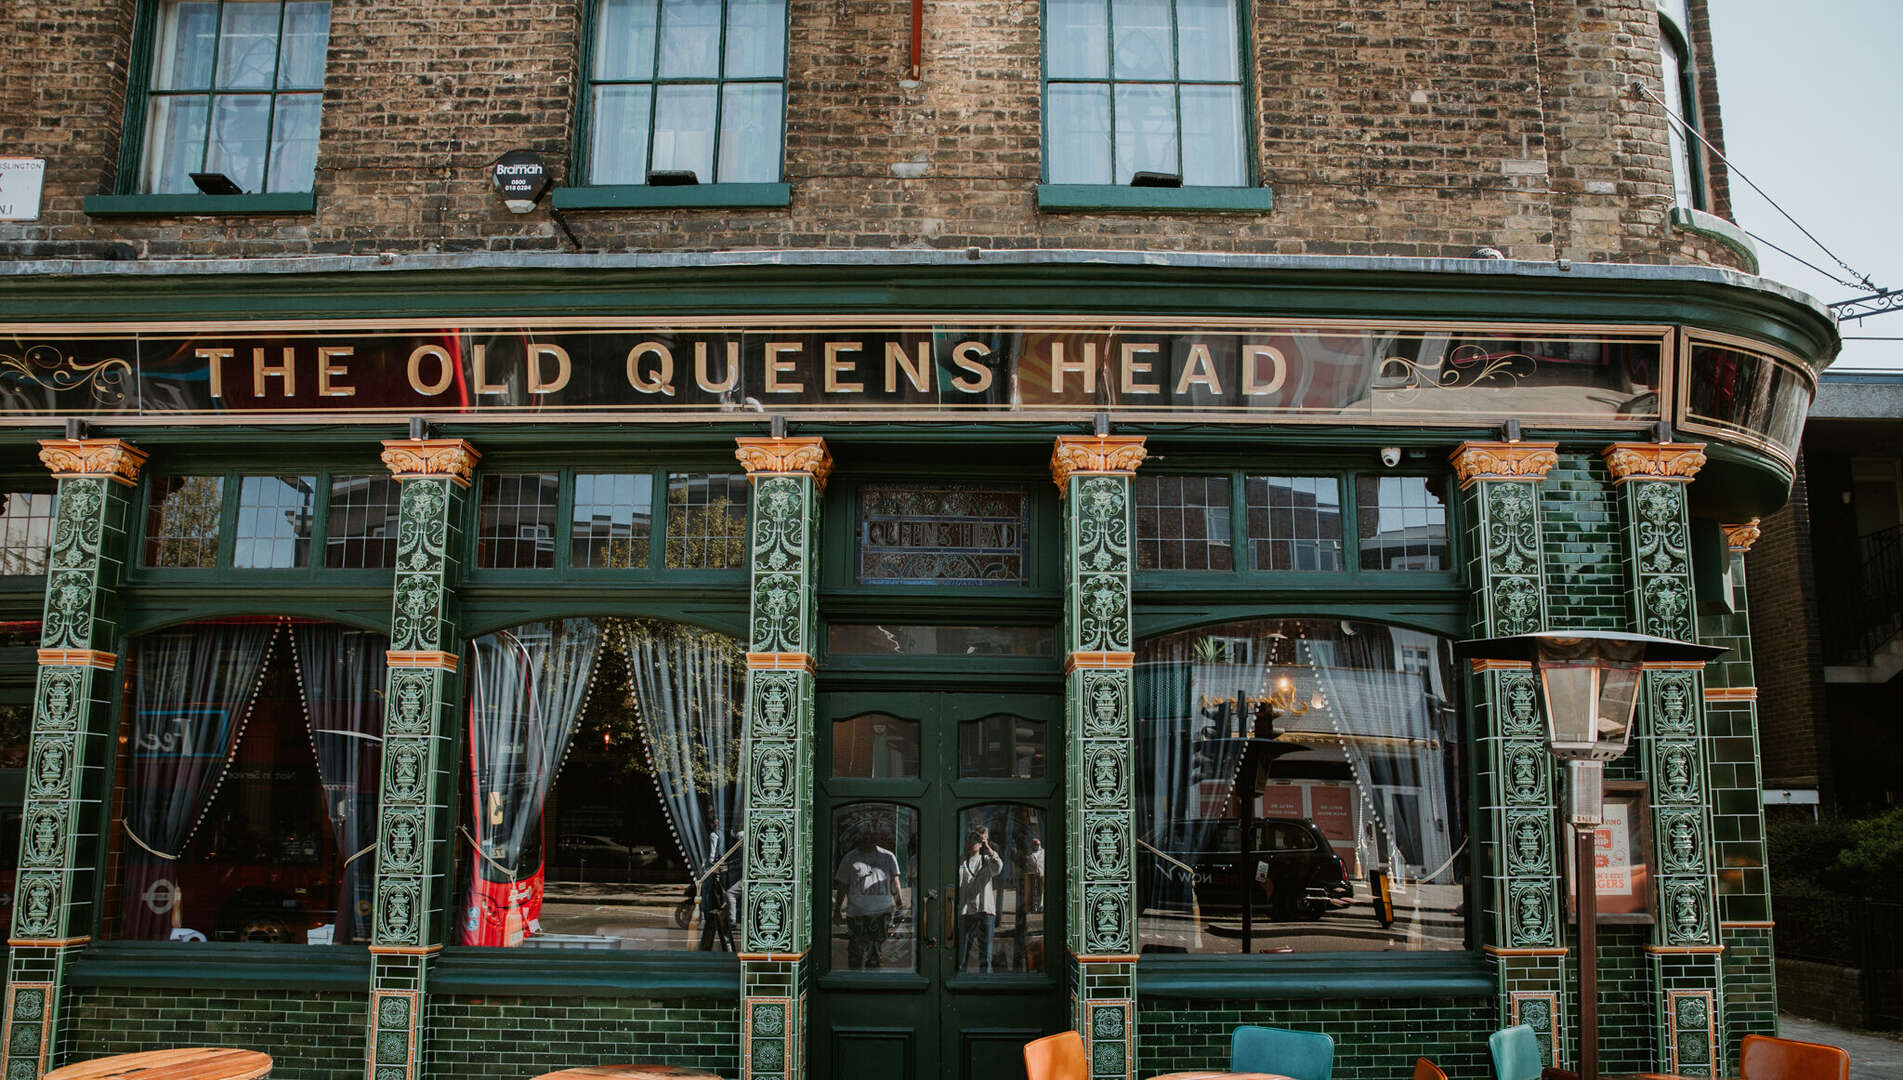 The Old Queens Head Pub in Islington